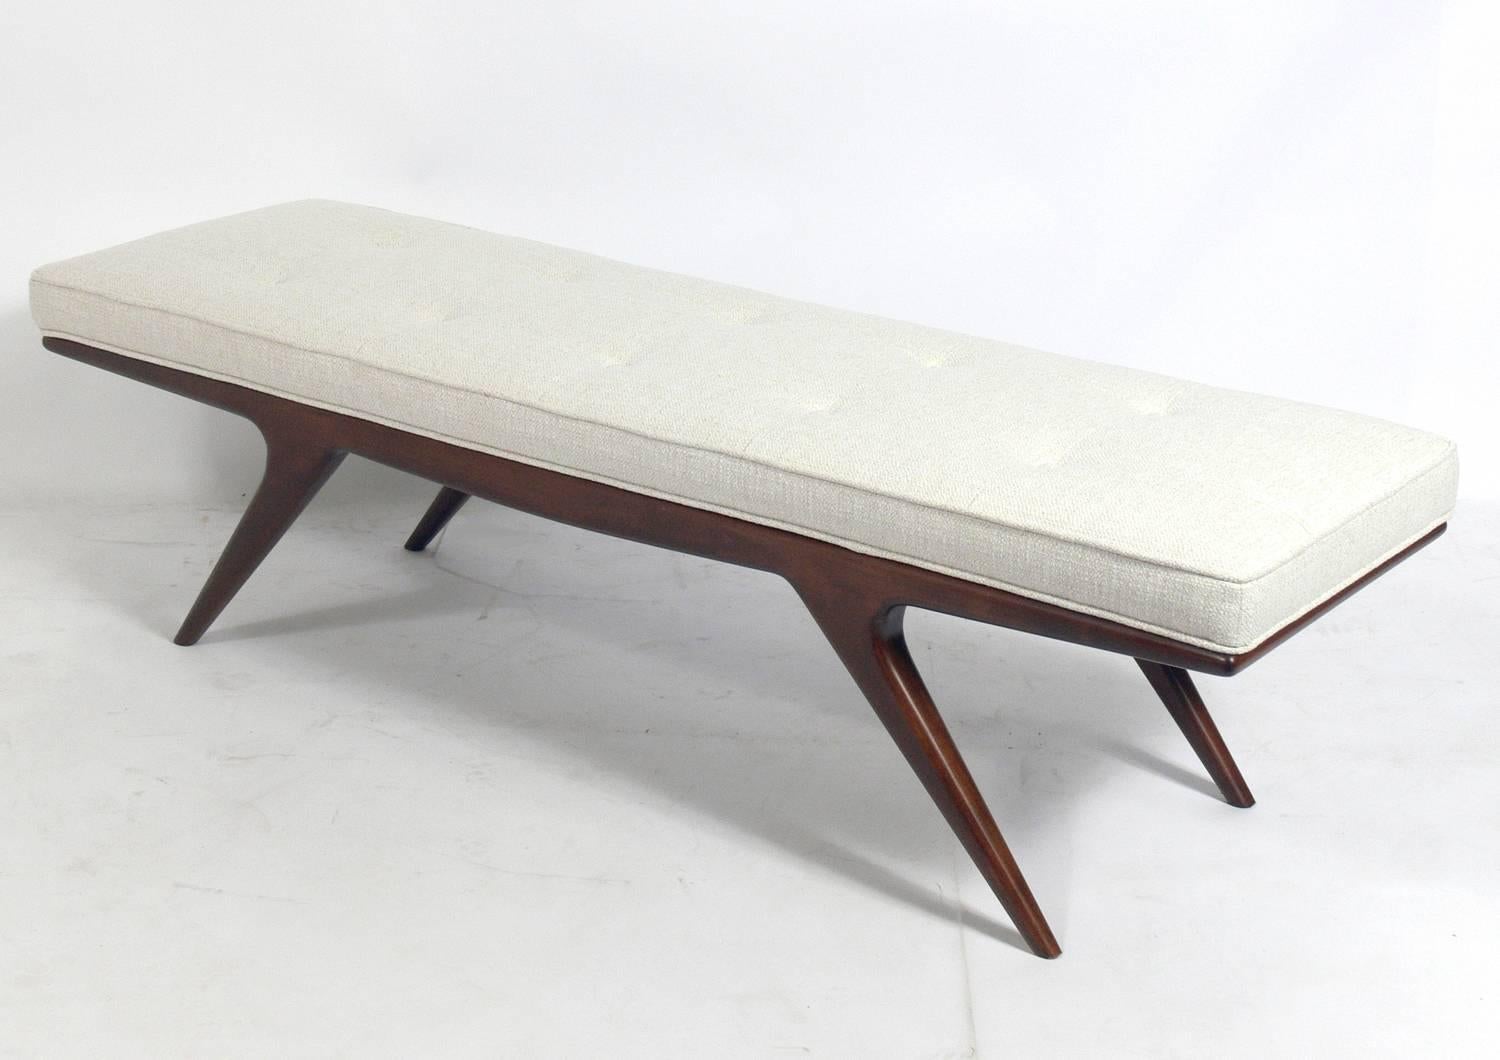 Sculptural splayed leg bench, circa 1960s. It has been refinished and reupholstered in an ivory color boucle fabric.